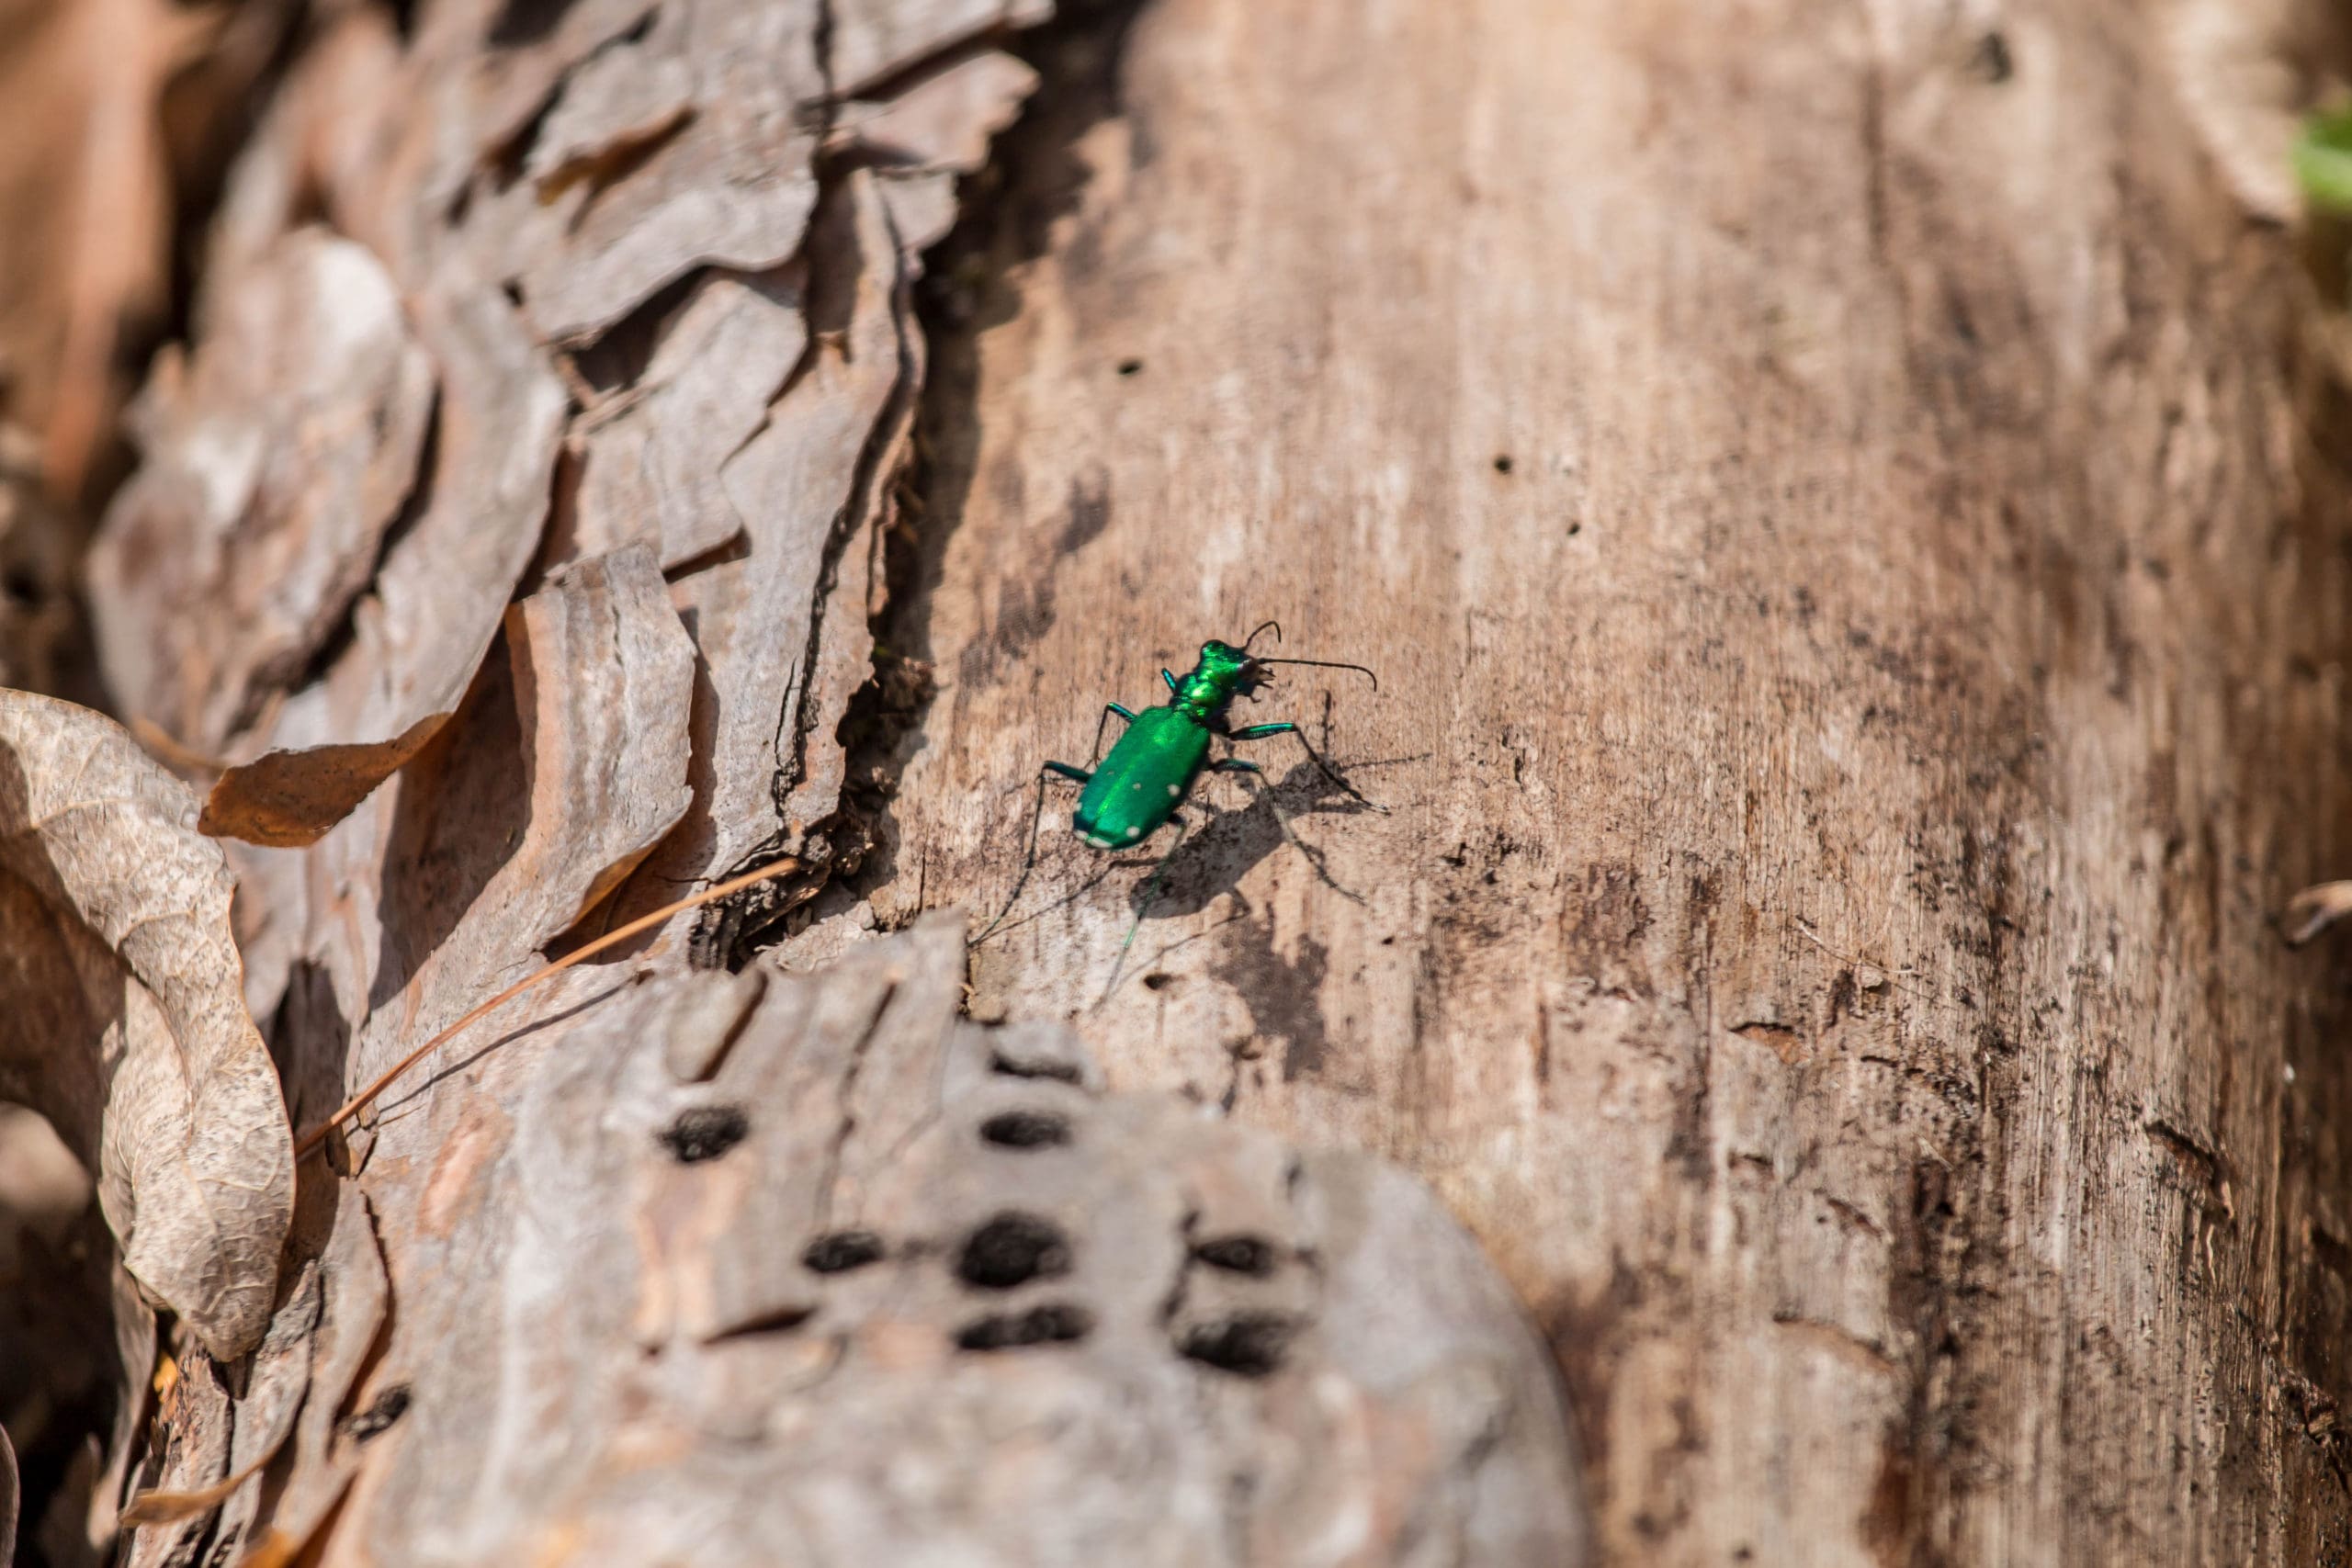 Emerald ash borer looking for a meal, An invasive bug that feeds on ash trees.